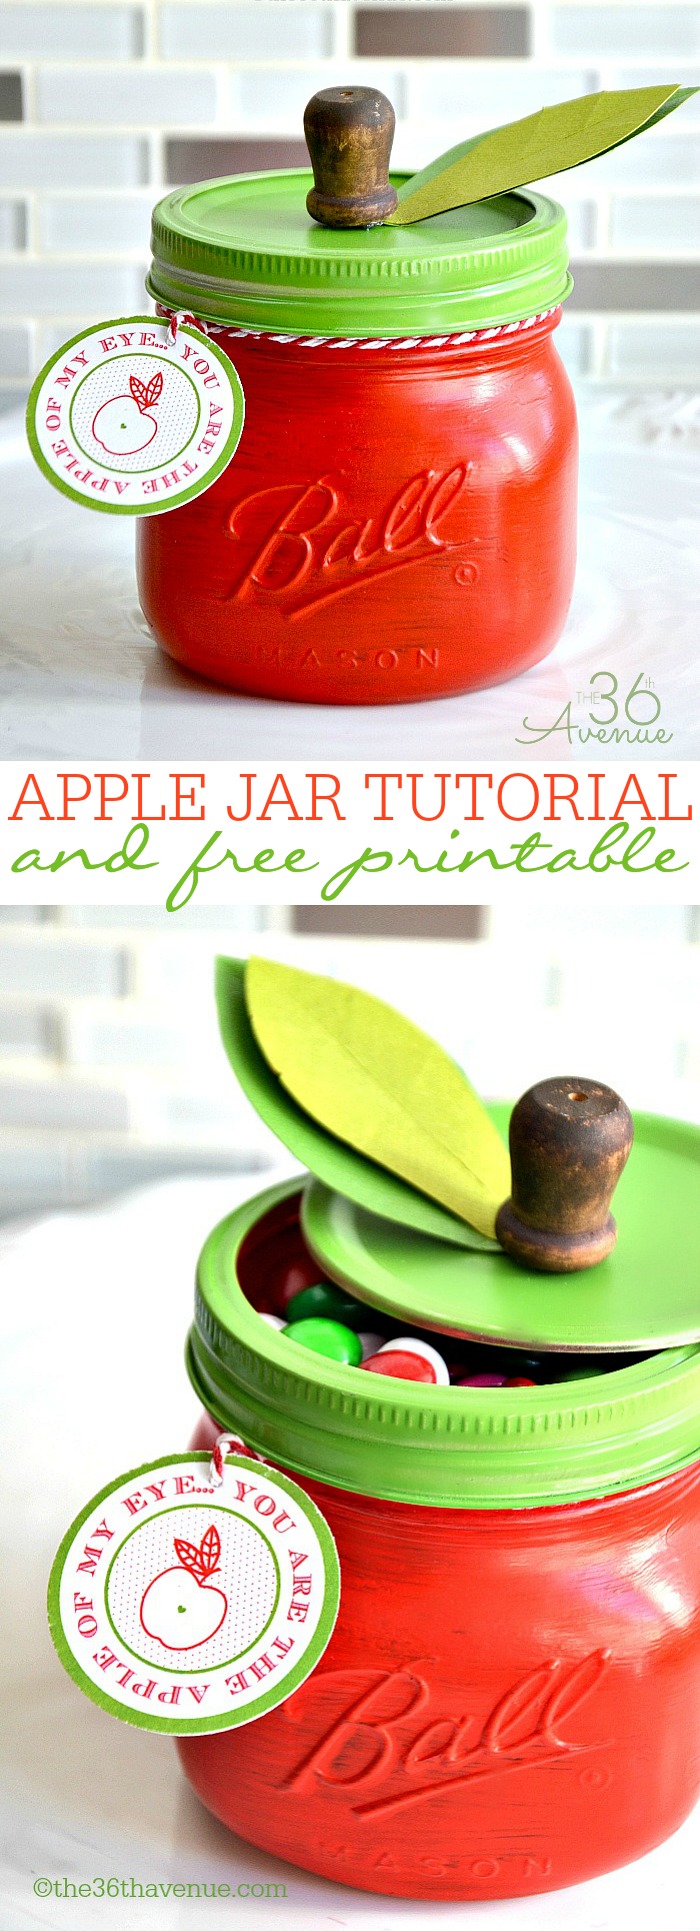 Gift Idea - DIY Apple Jar and Free Printable at the36thavenue.com 